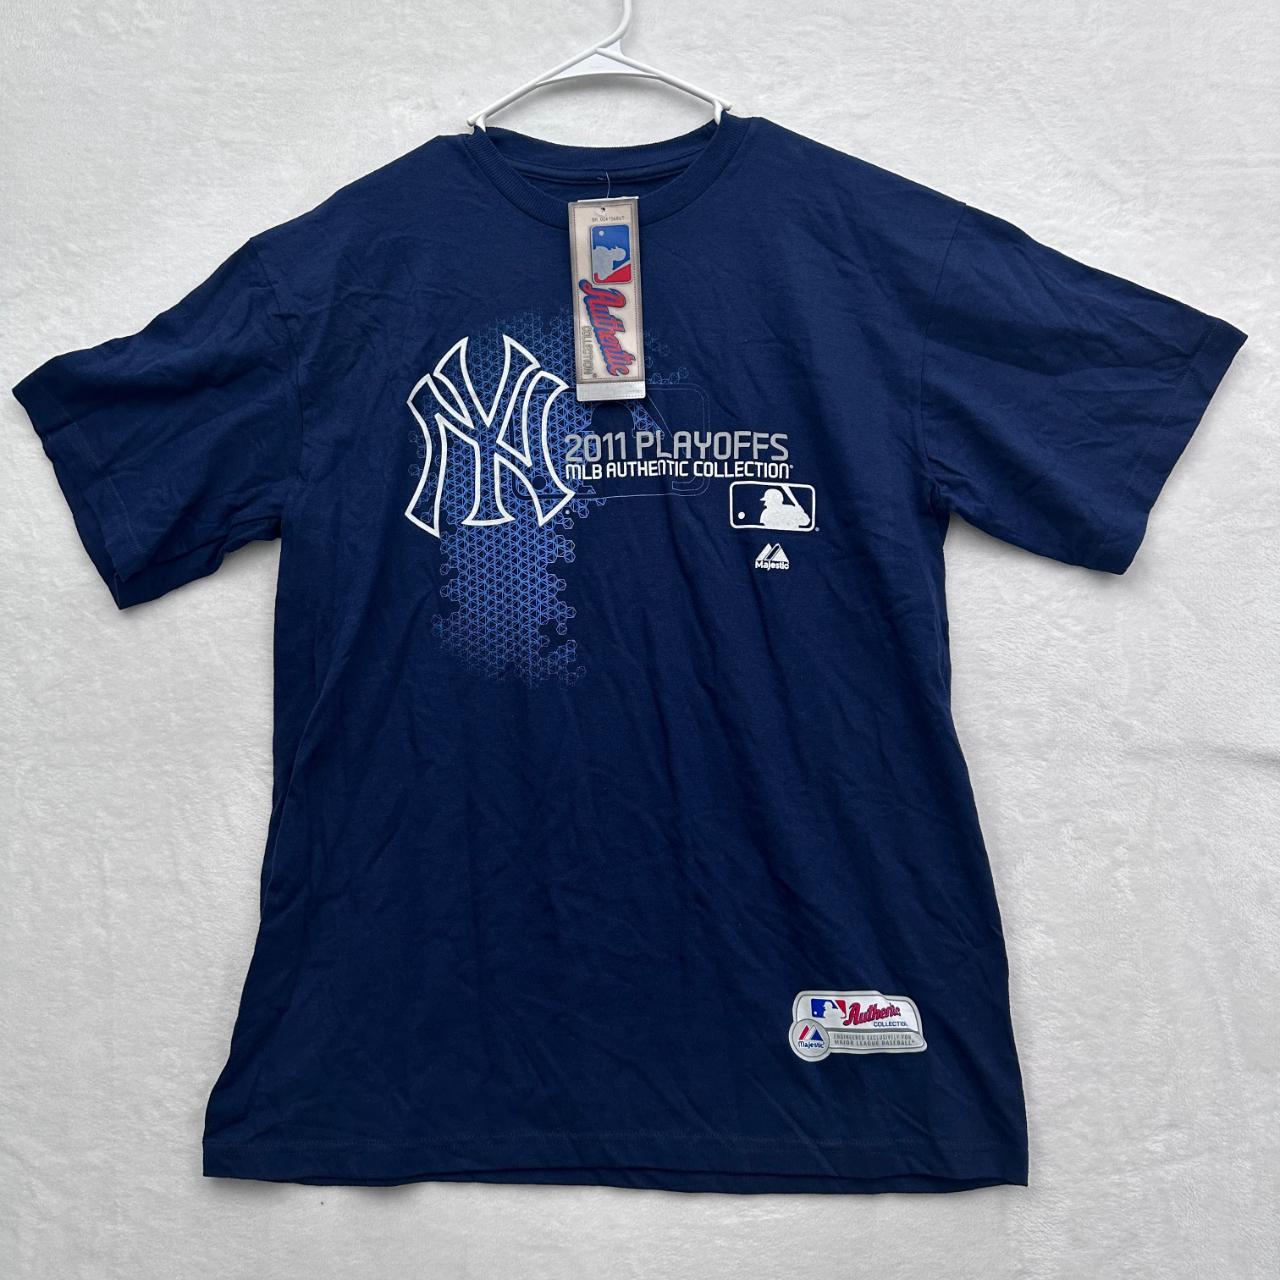 Majestic New York Yankees MLB Jerseys for sale